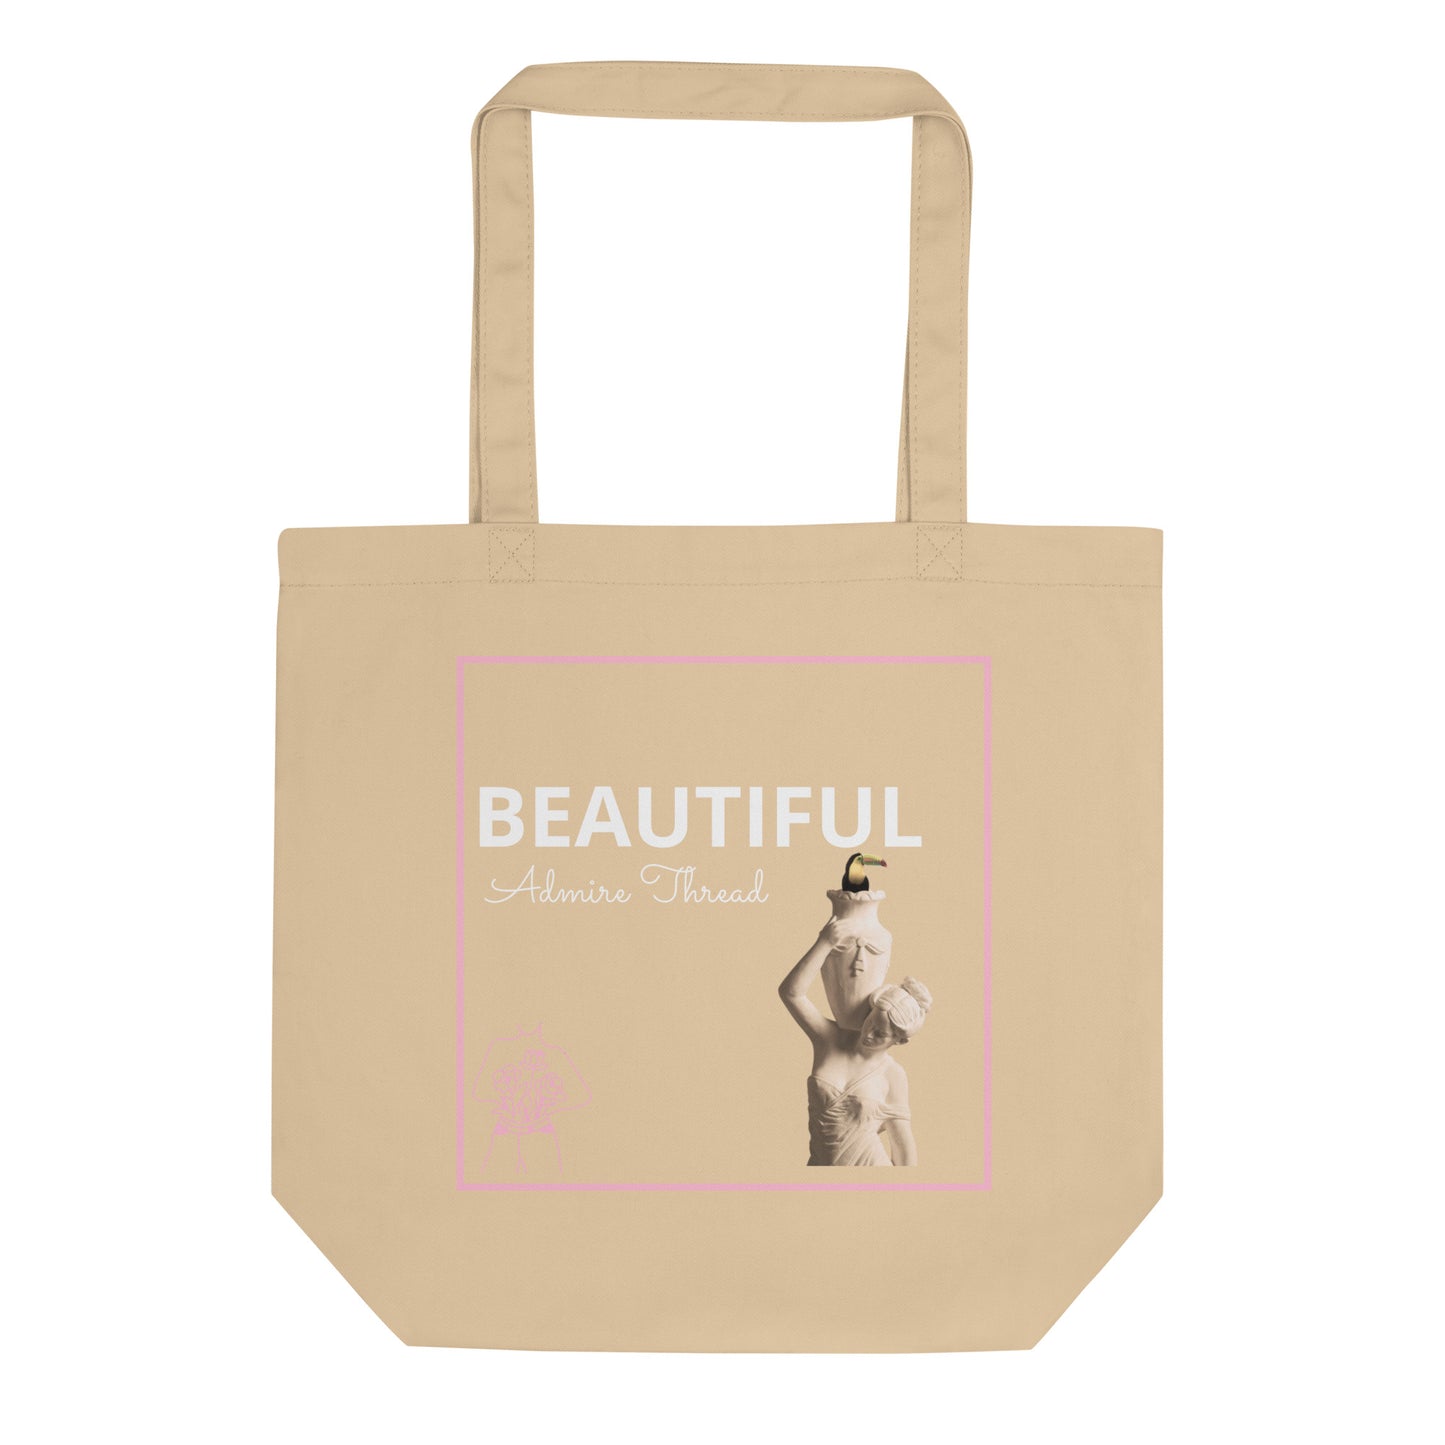 Admire Thread Beautiful Just The Way You Are Tote bag